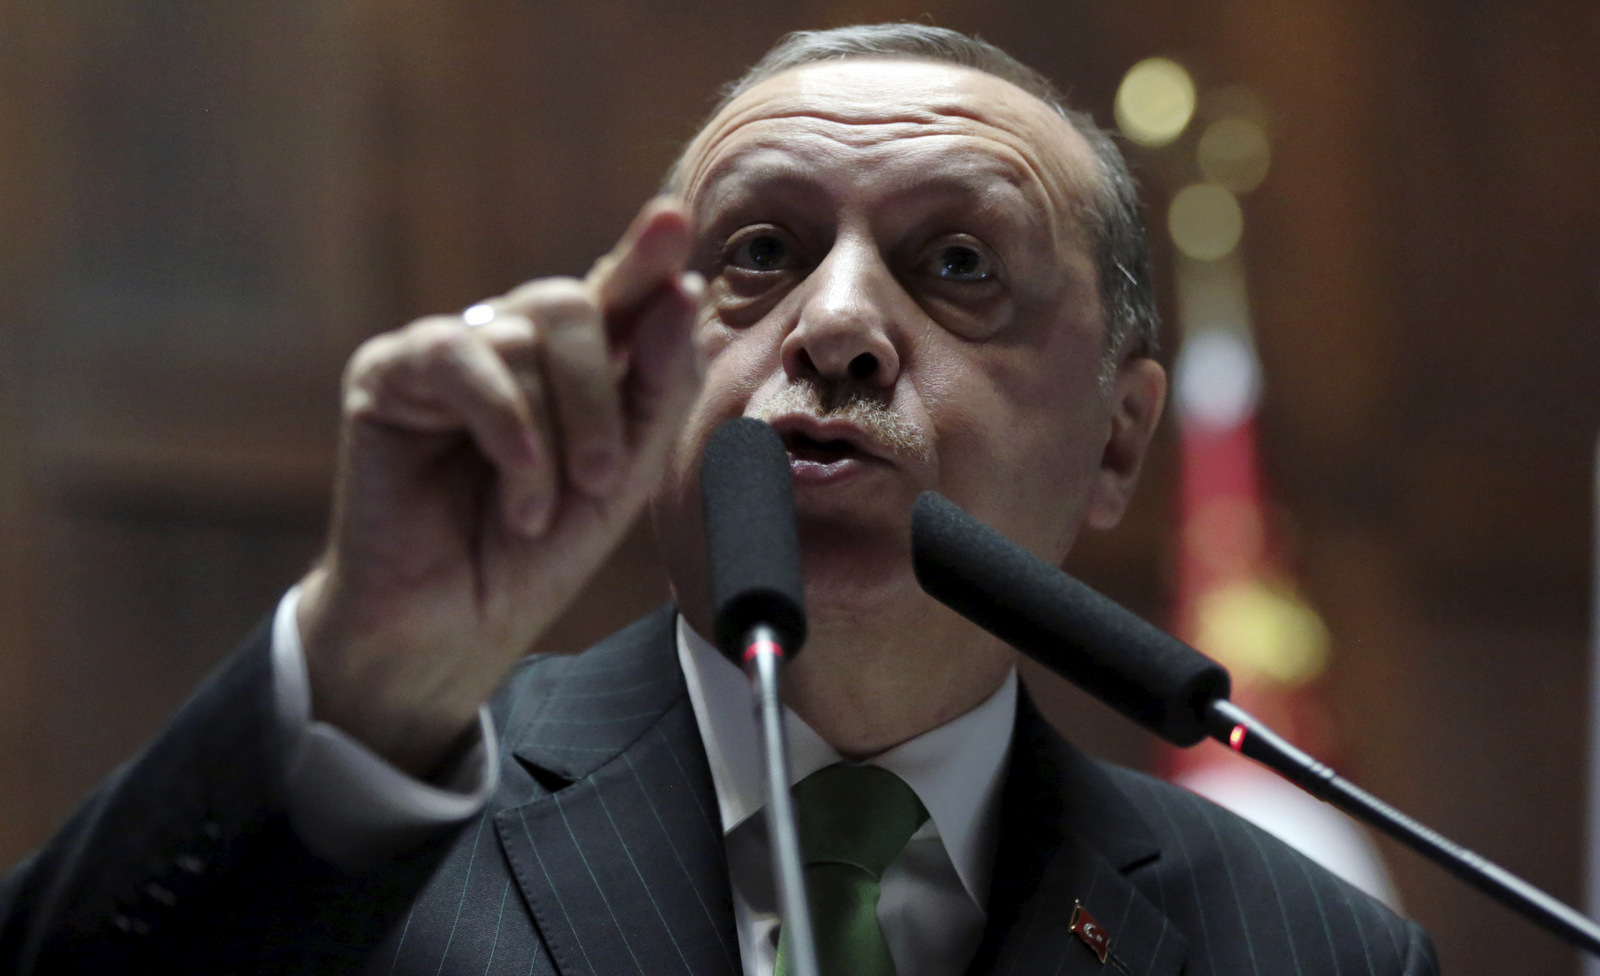 Turkey's President Recep Tayyip Erdogan addresses his lawmakers at the parliament in Ankara, Turkey, where he called on NATO to take a stance against the United States, a fellow ally, over its plans fund and arm a 30,000-strong Kurdish-led militia in Syria, Jan. 16, 2018. (AP/Burhan Ozbilici)